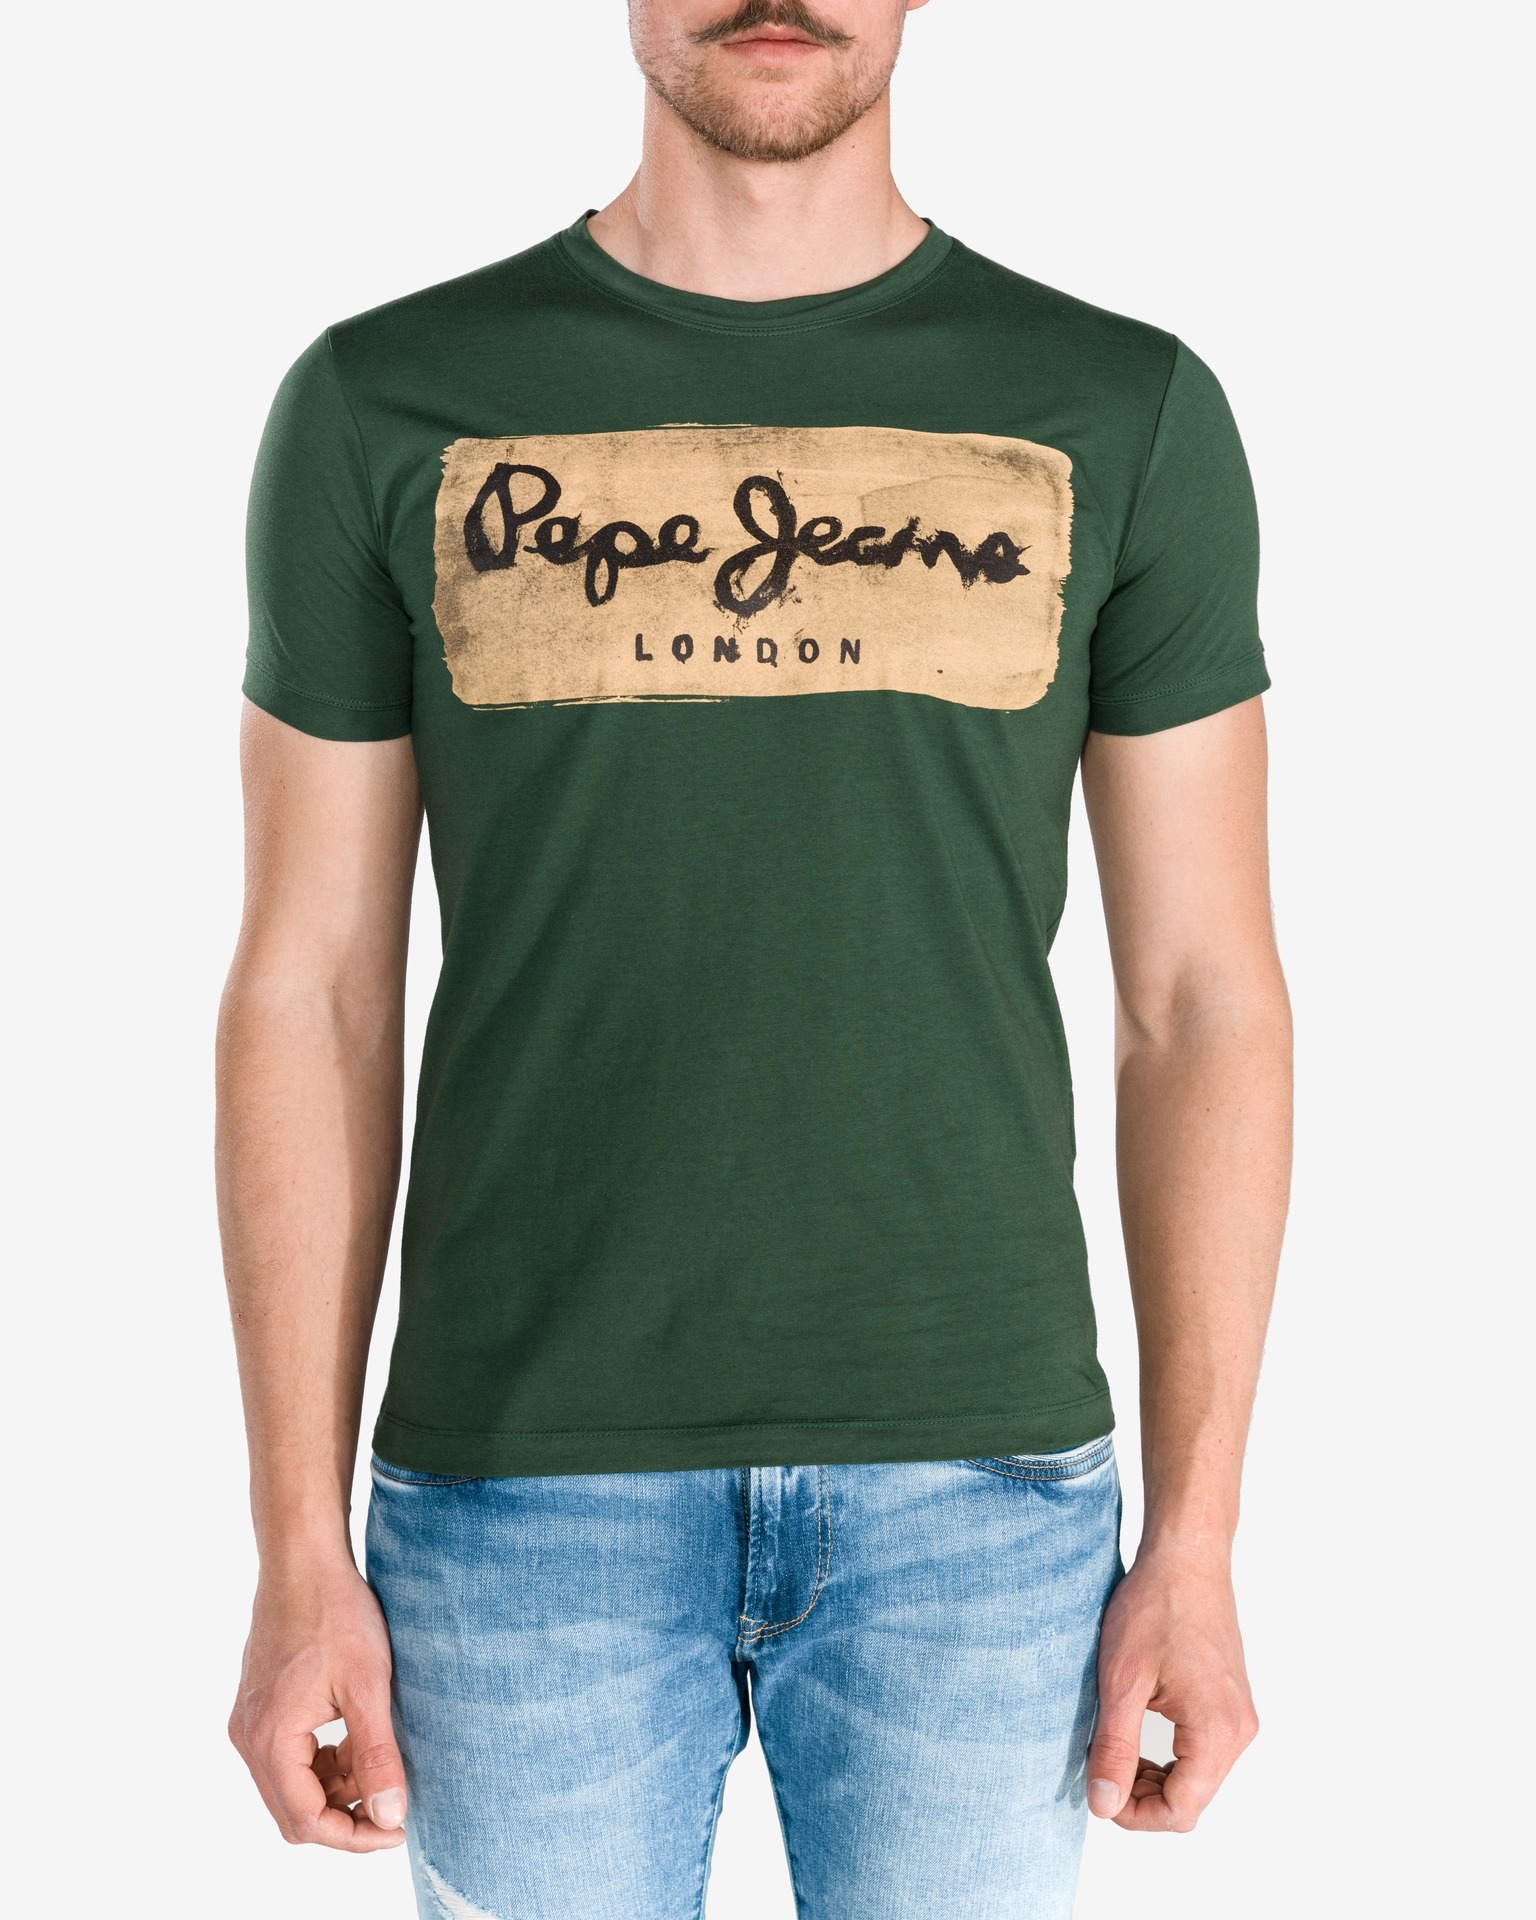 Jeans T-shirt - Charing Pepe